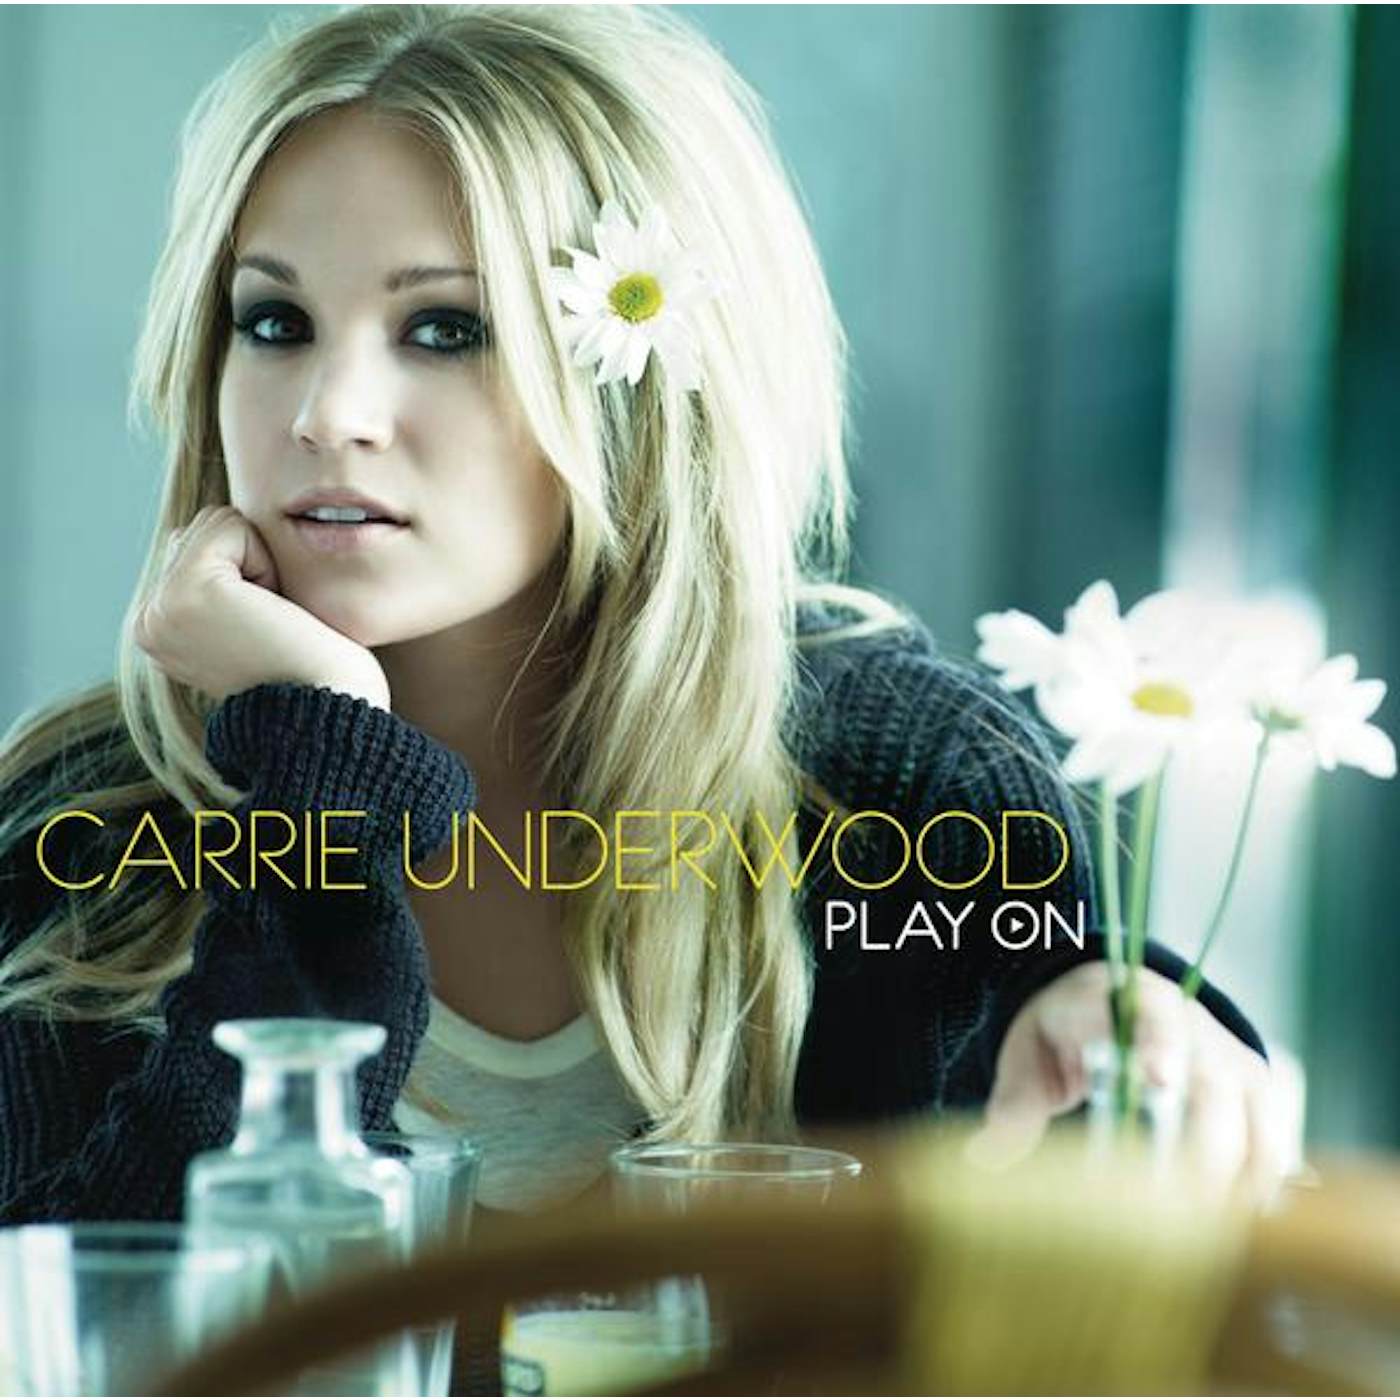 Carrie Underwood PLAY ON CD